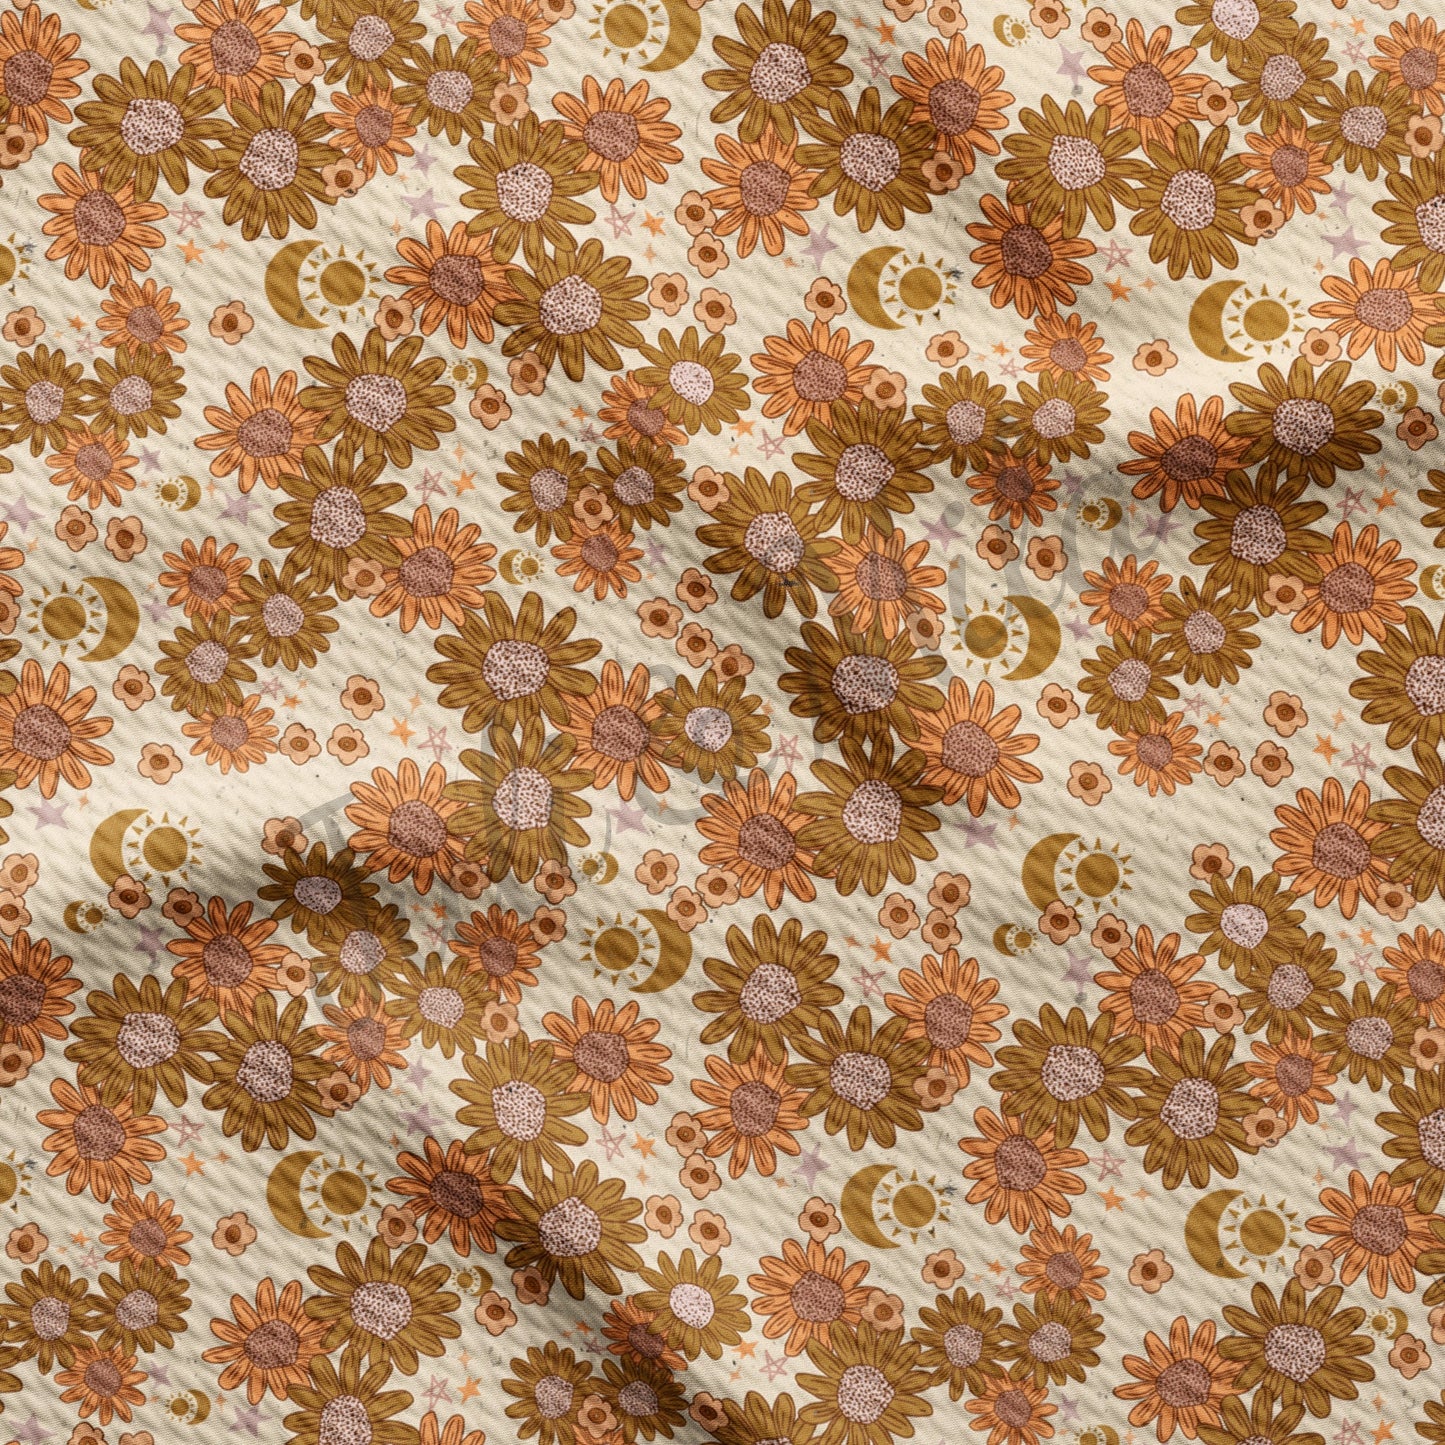 Bullet Textured Fabric Floral103